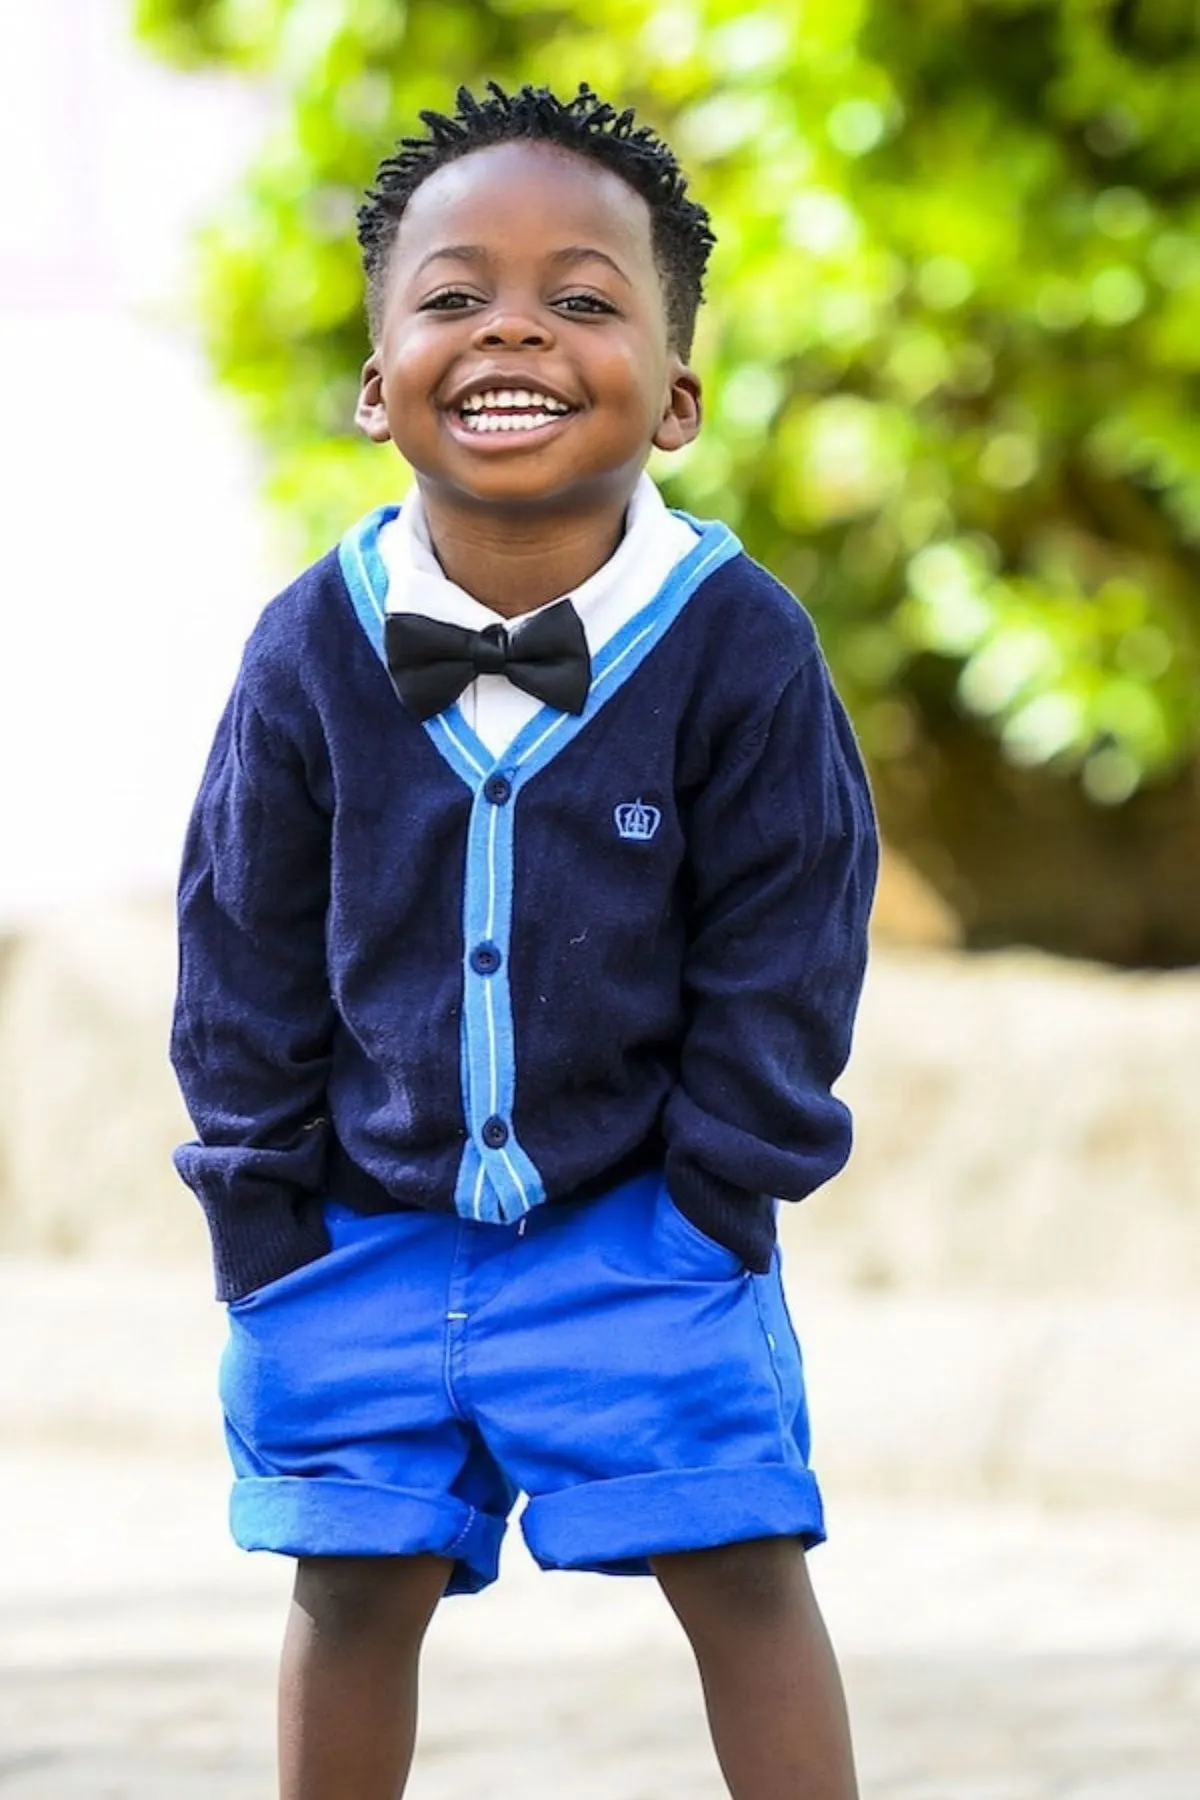 Toddler boy wearing shorts, cardigan, and bow tie puts his hands in his pockets and smiles.